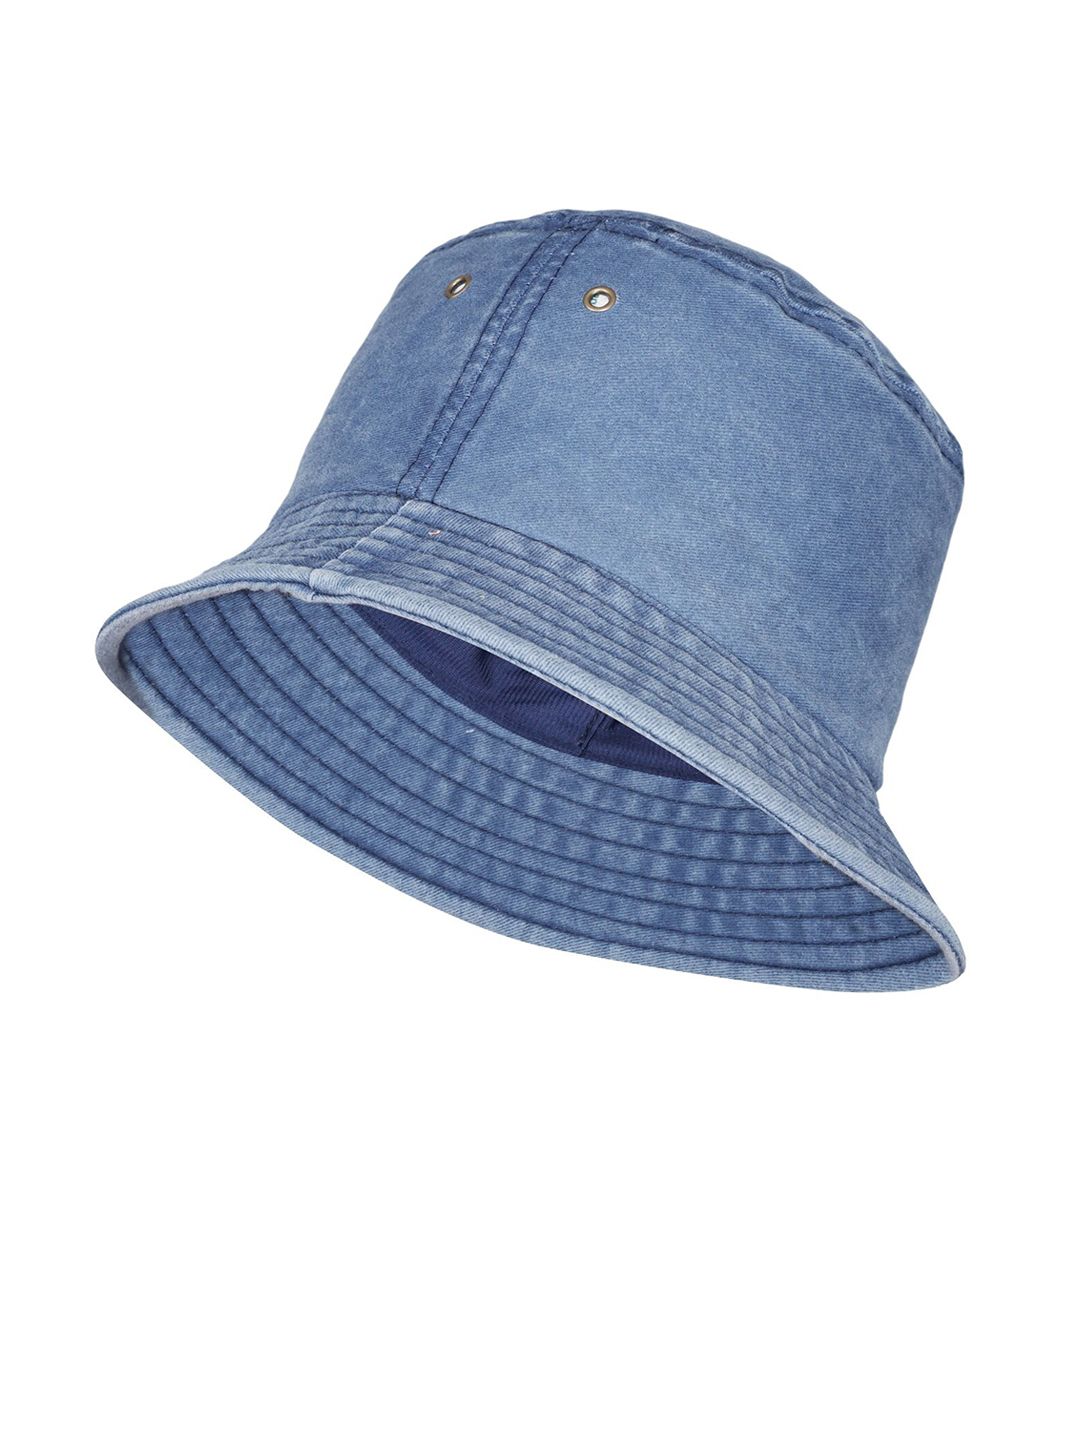 FabSeasons Unisex Blue Solid Pure Cotton Bucket Sun Hat Price in India